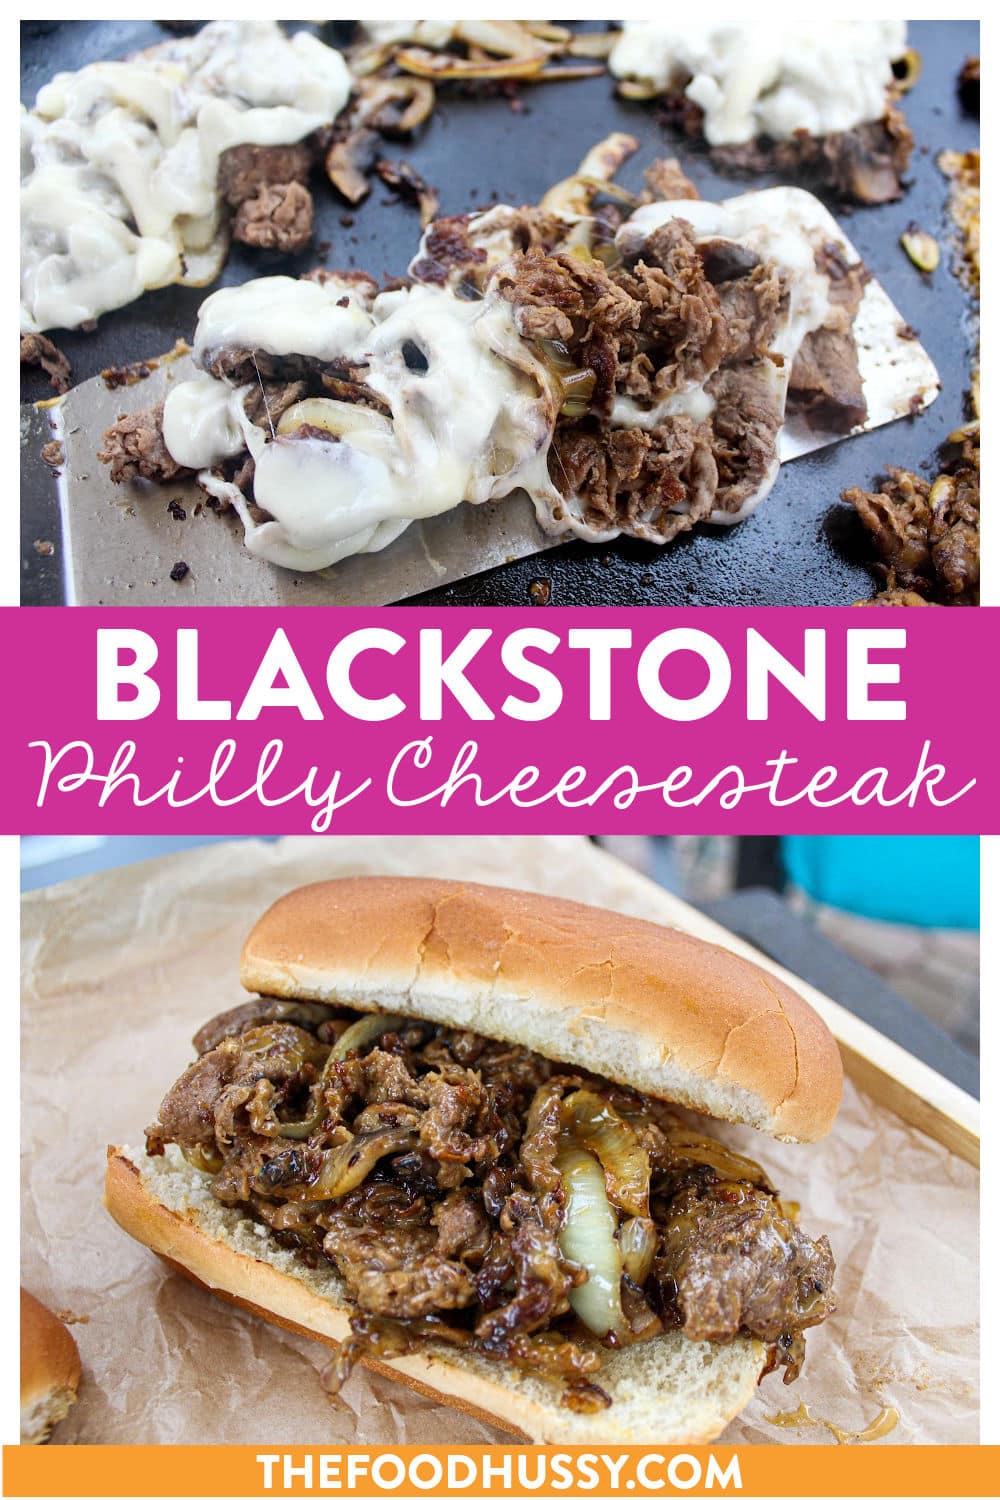 Blackstone Philly Cheese Steaks are my new favorite recipe! It's just like getting one at my favorite restaurant - but I can make it myself in 15 minutes! And have it just the way I like it - loaded with onions, mushrooms and cheese on a toasted bun! via @foodhussy